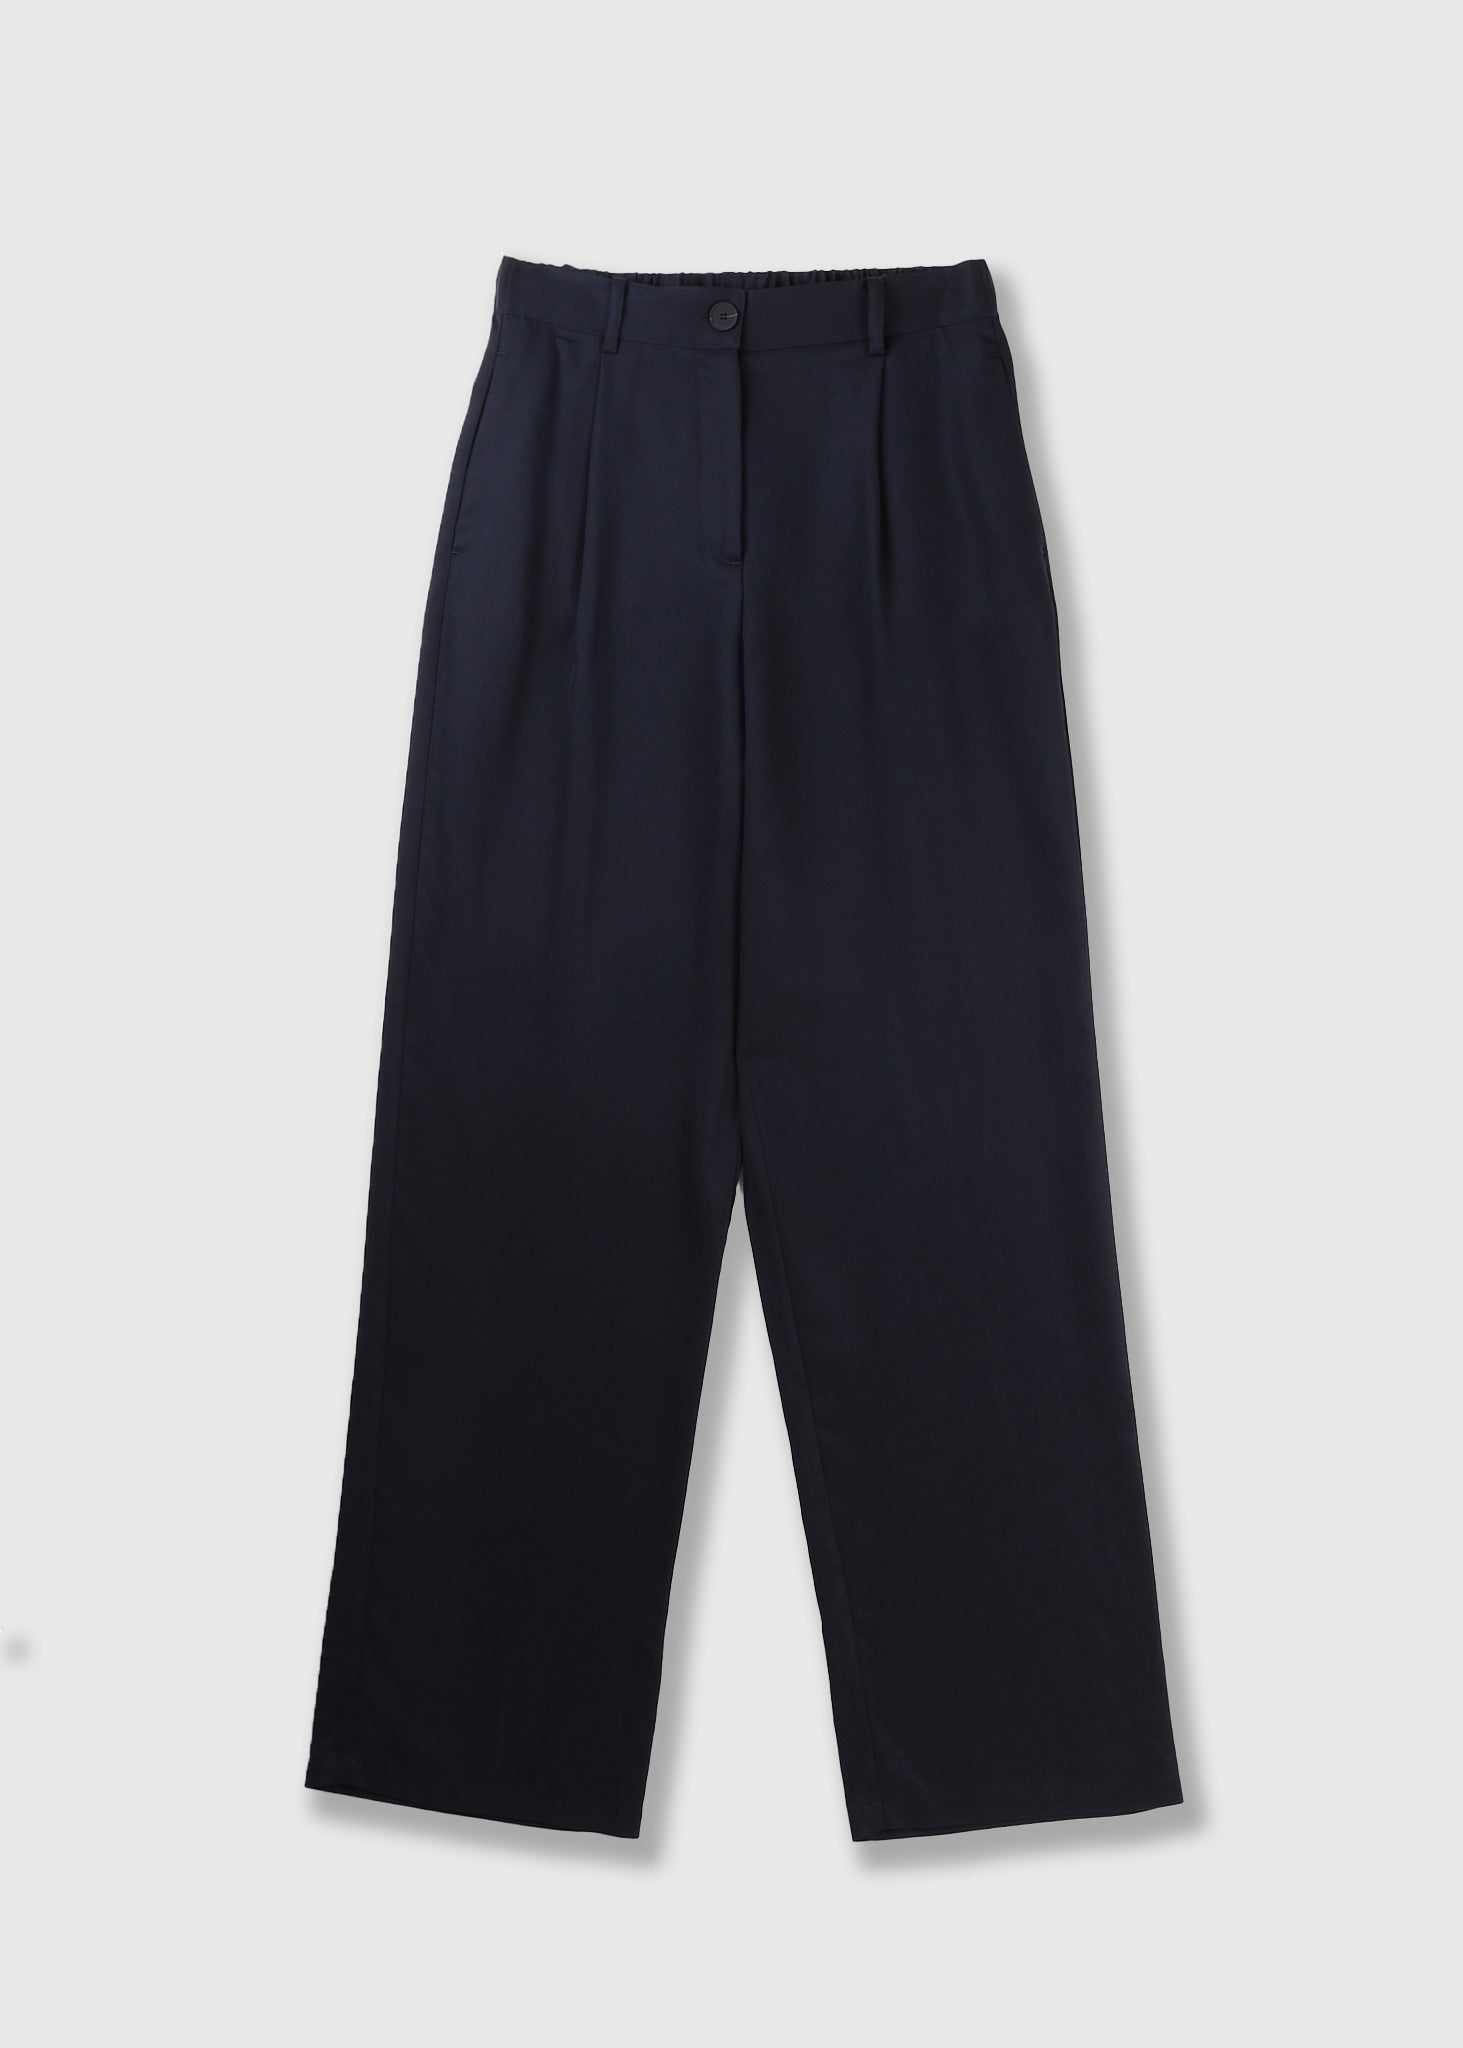 Levete Room Womens Alecia Tailored Straight Leg Trousers In Dark Navy product